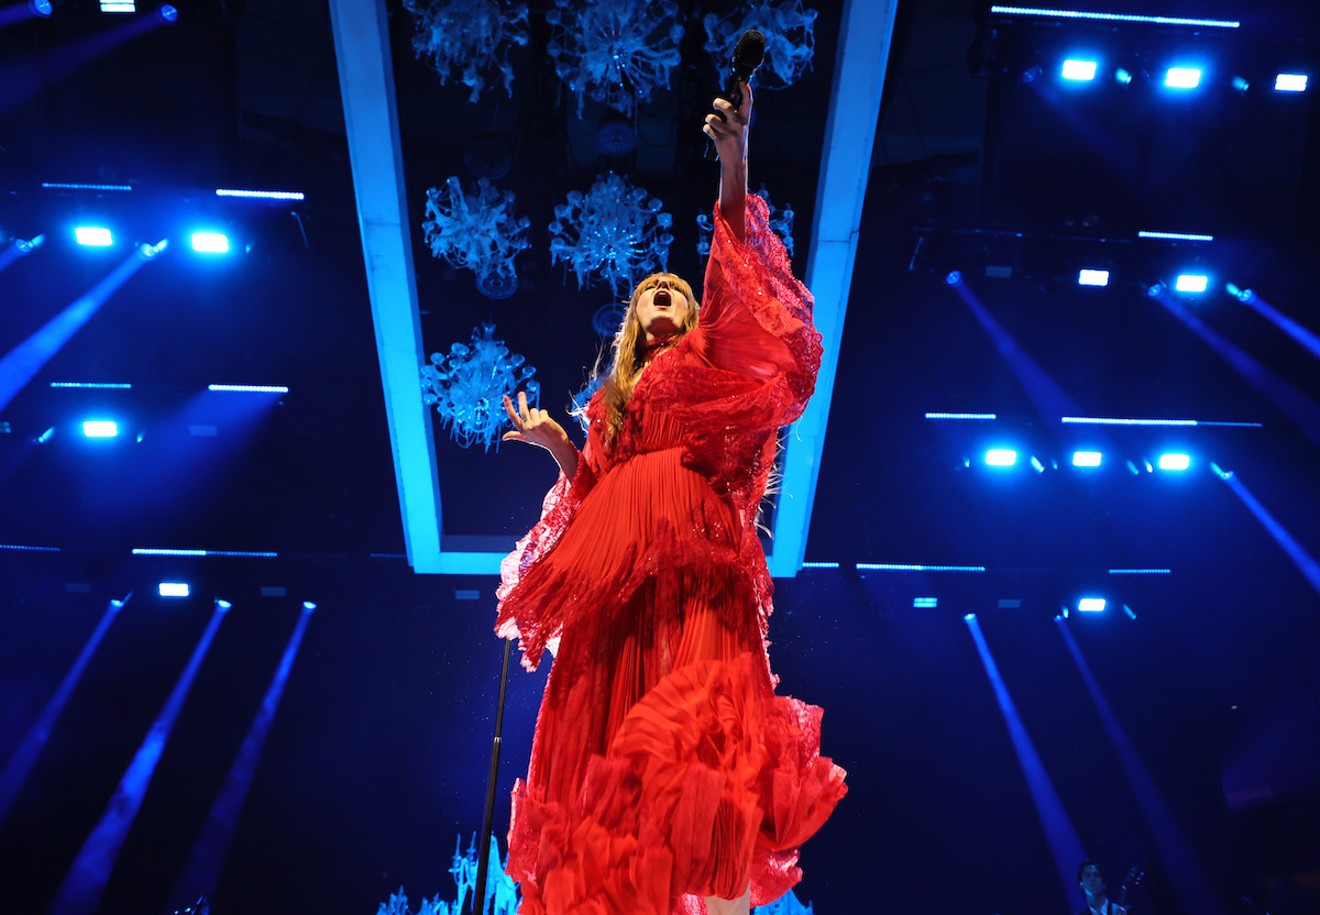 Florence and the Machine performed at Madison Square Garden on September 16 in New York City.